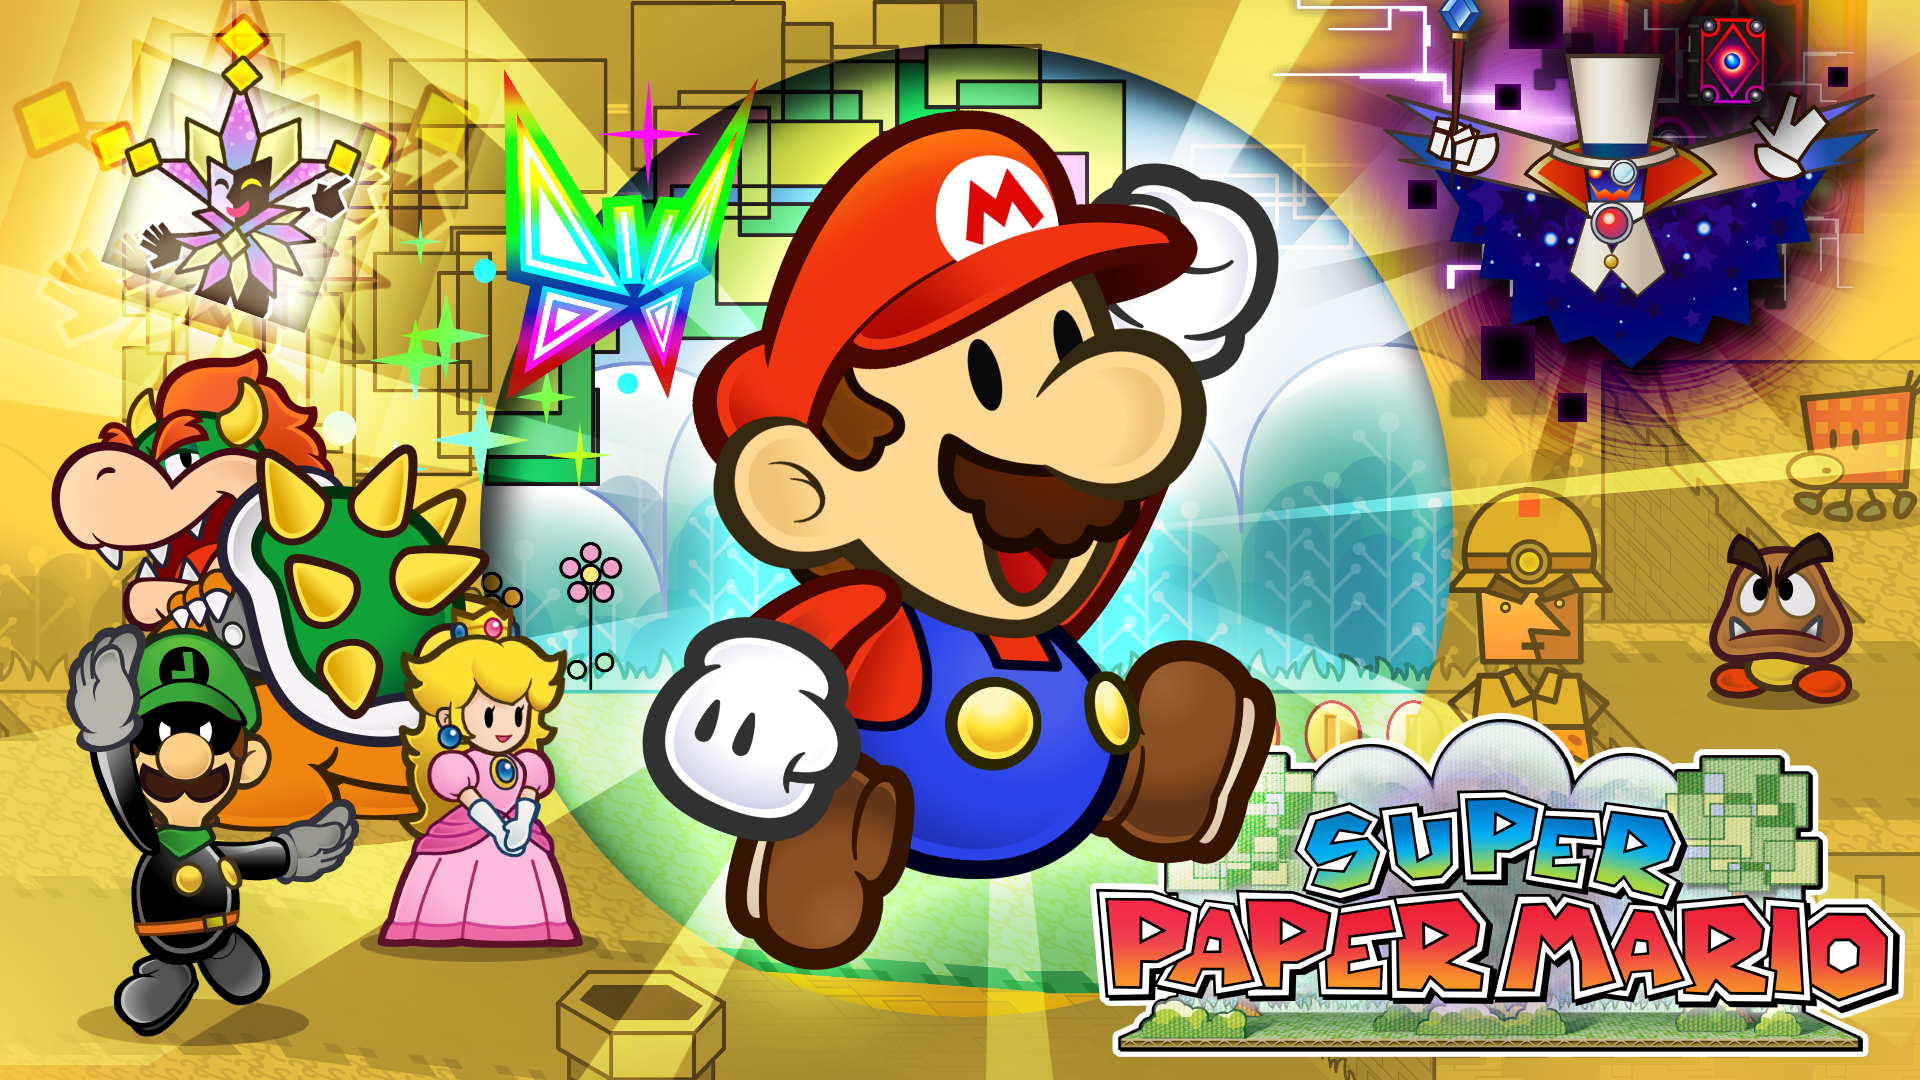 Super paper mario wallpaper by fawfulthegreat on